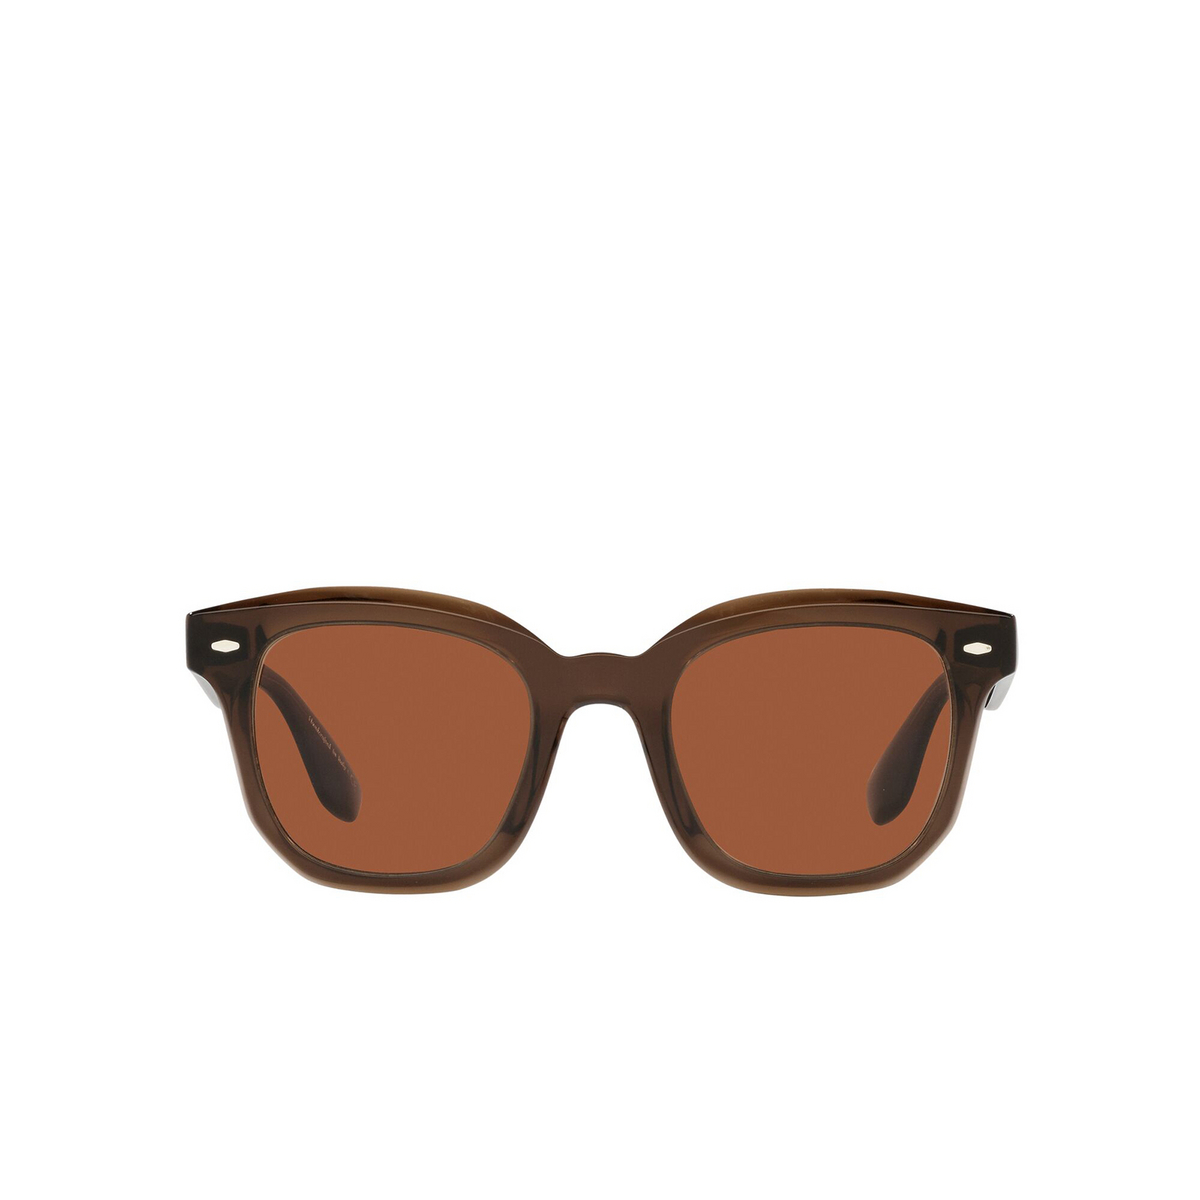 Oliver Peoples FILU' Sunglasses 162553 Espresso - front view